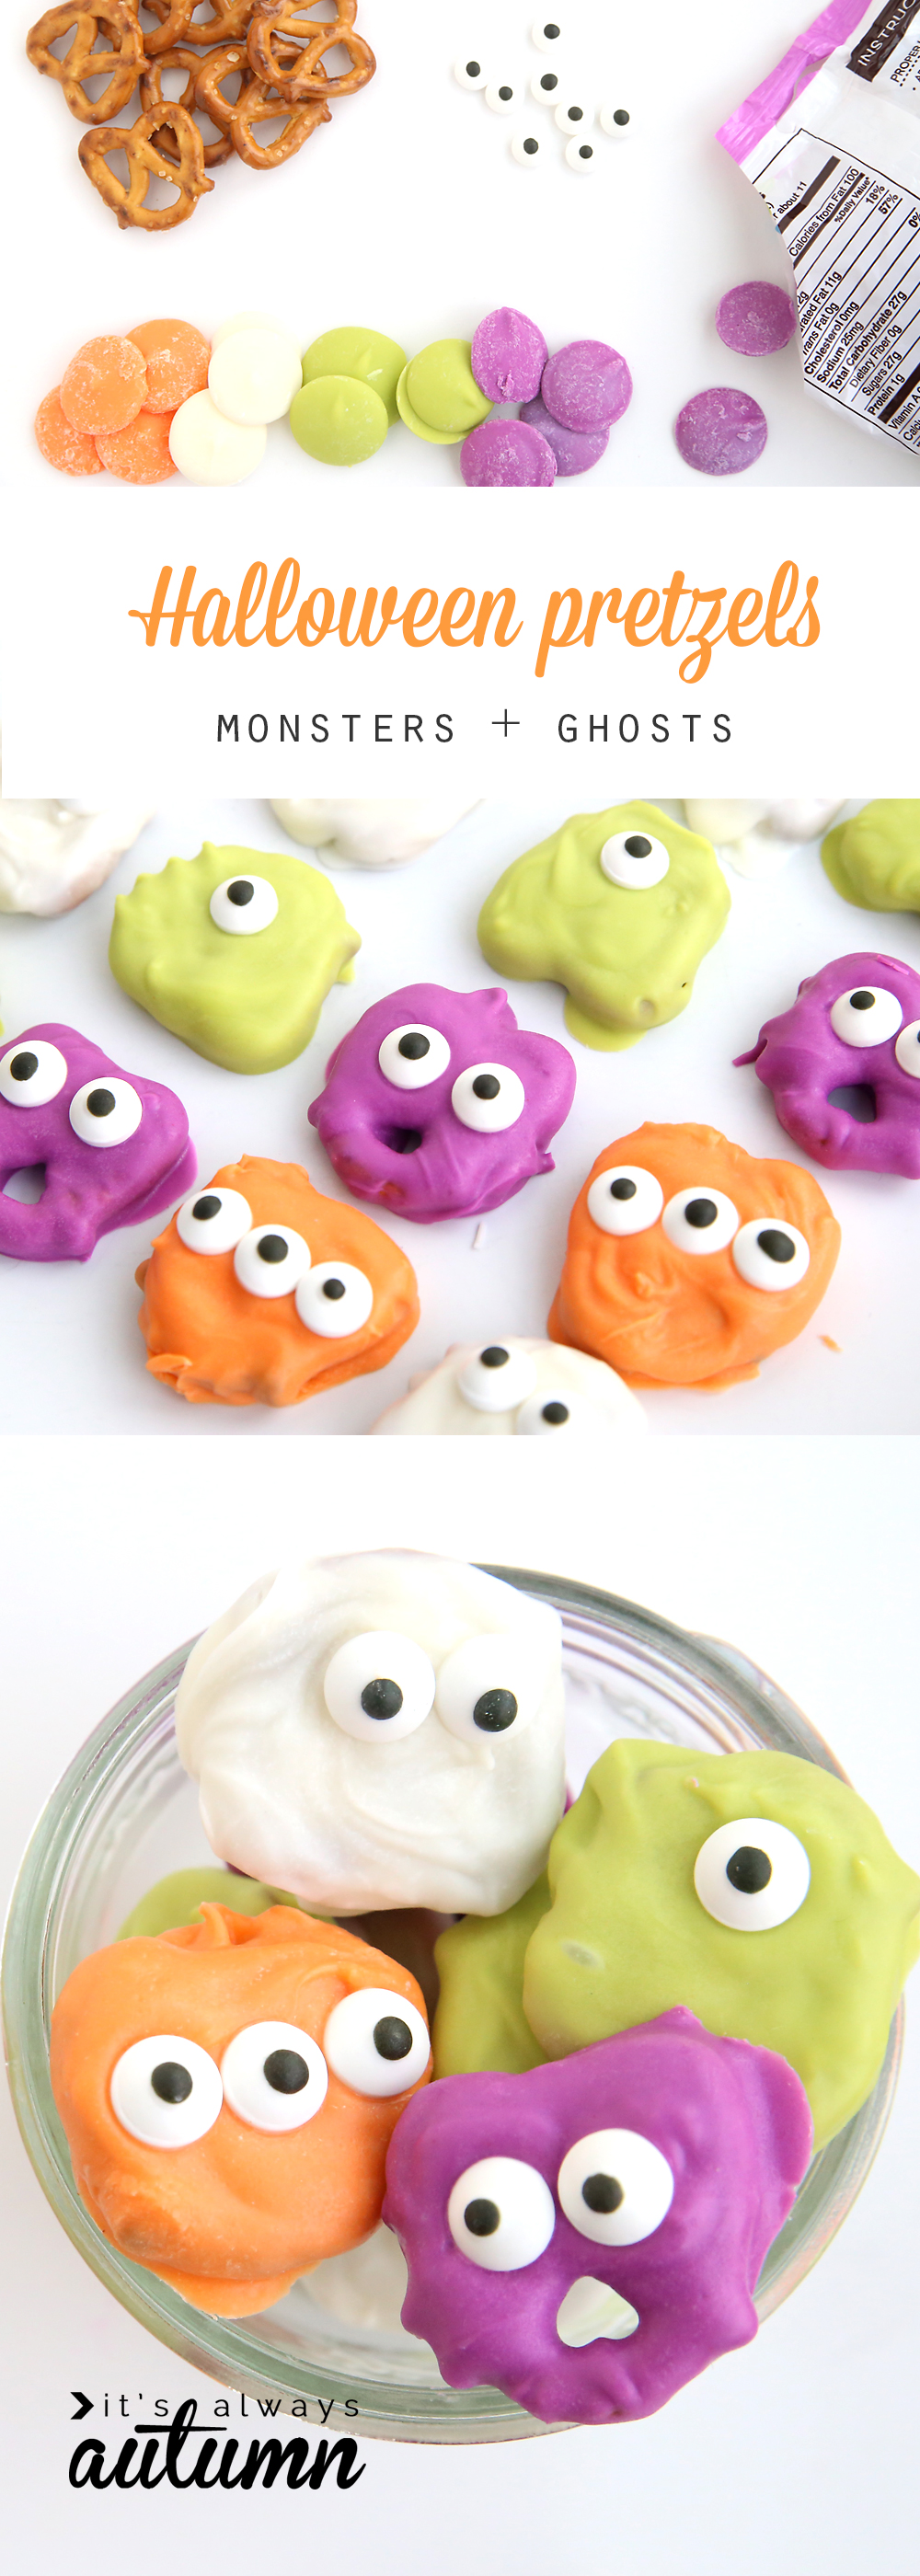 Pretzels dipped in candy and decorated to look like monsters and ghosts for Halloween